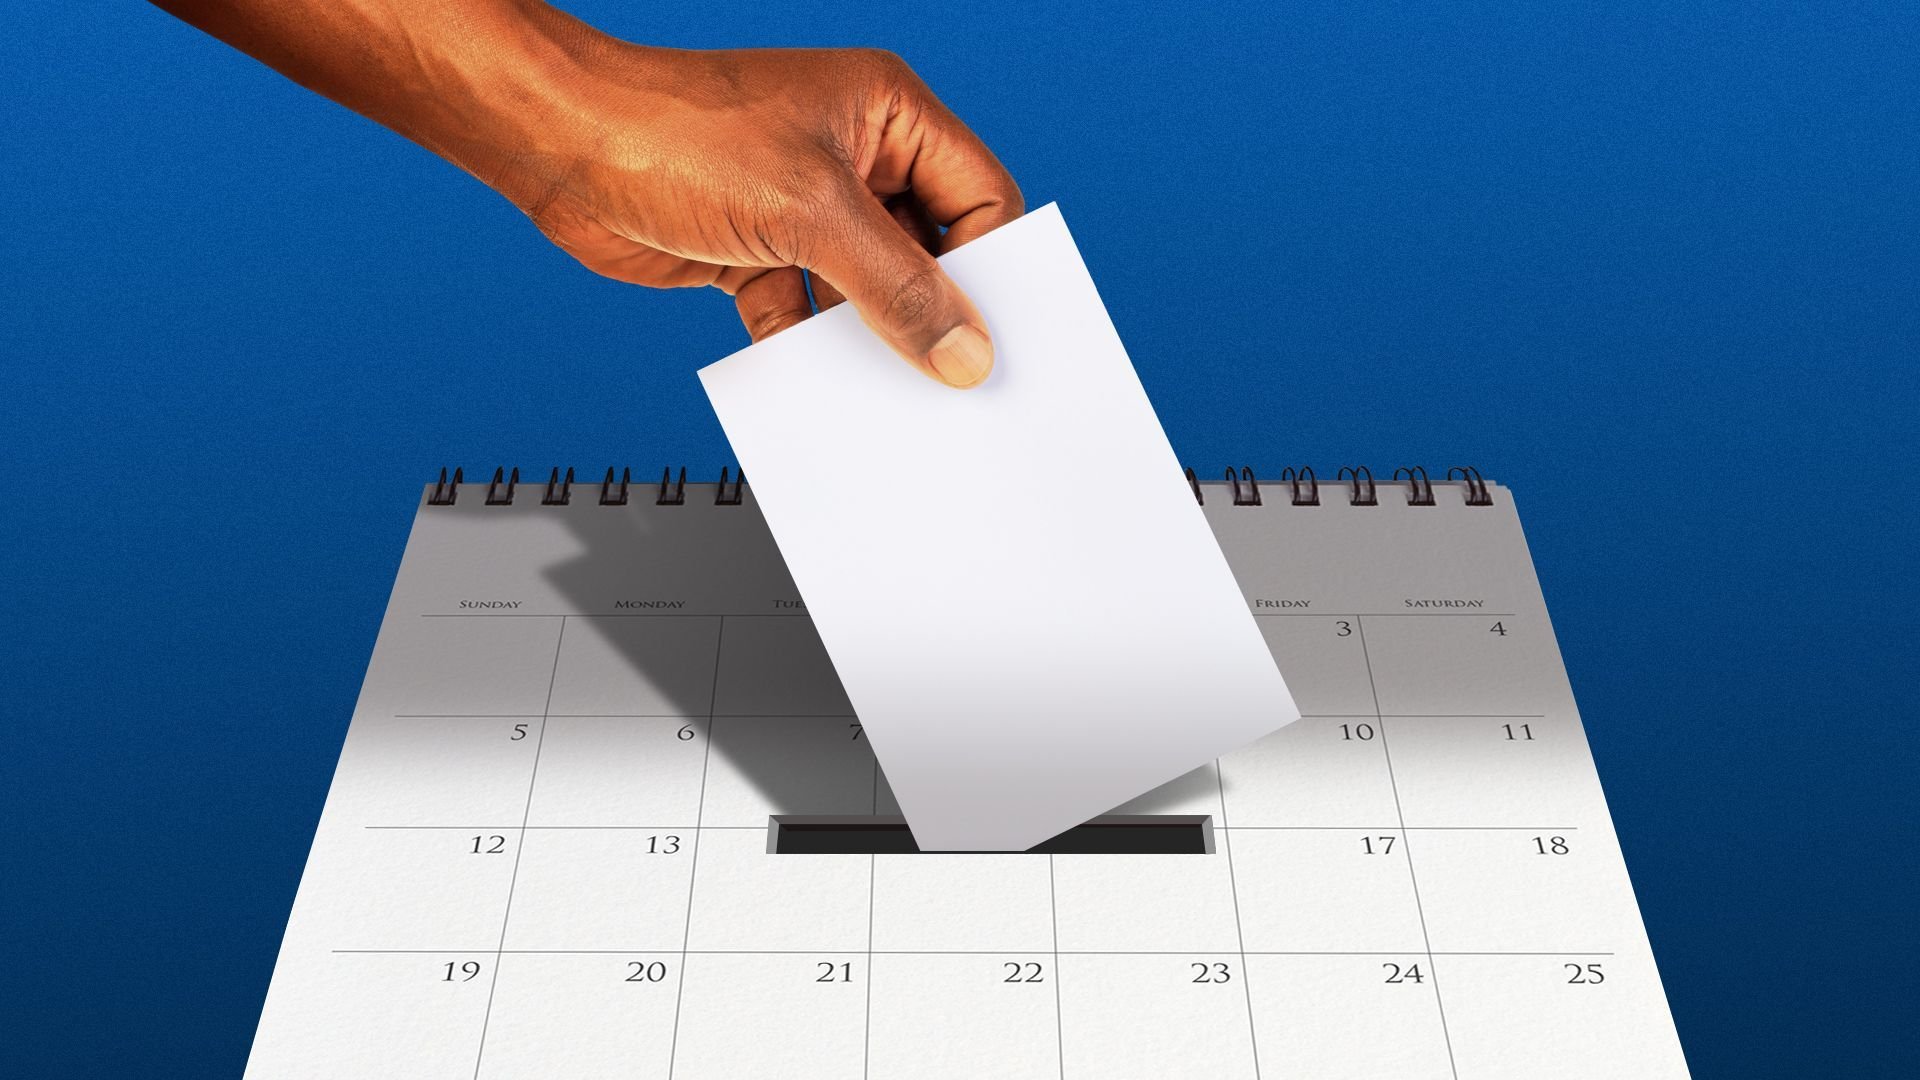 The most important dates on the 2024 presidential election calendar